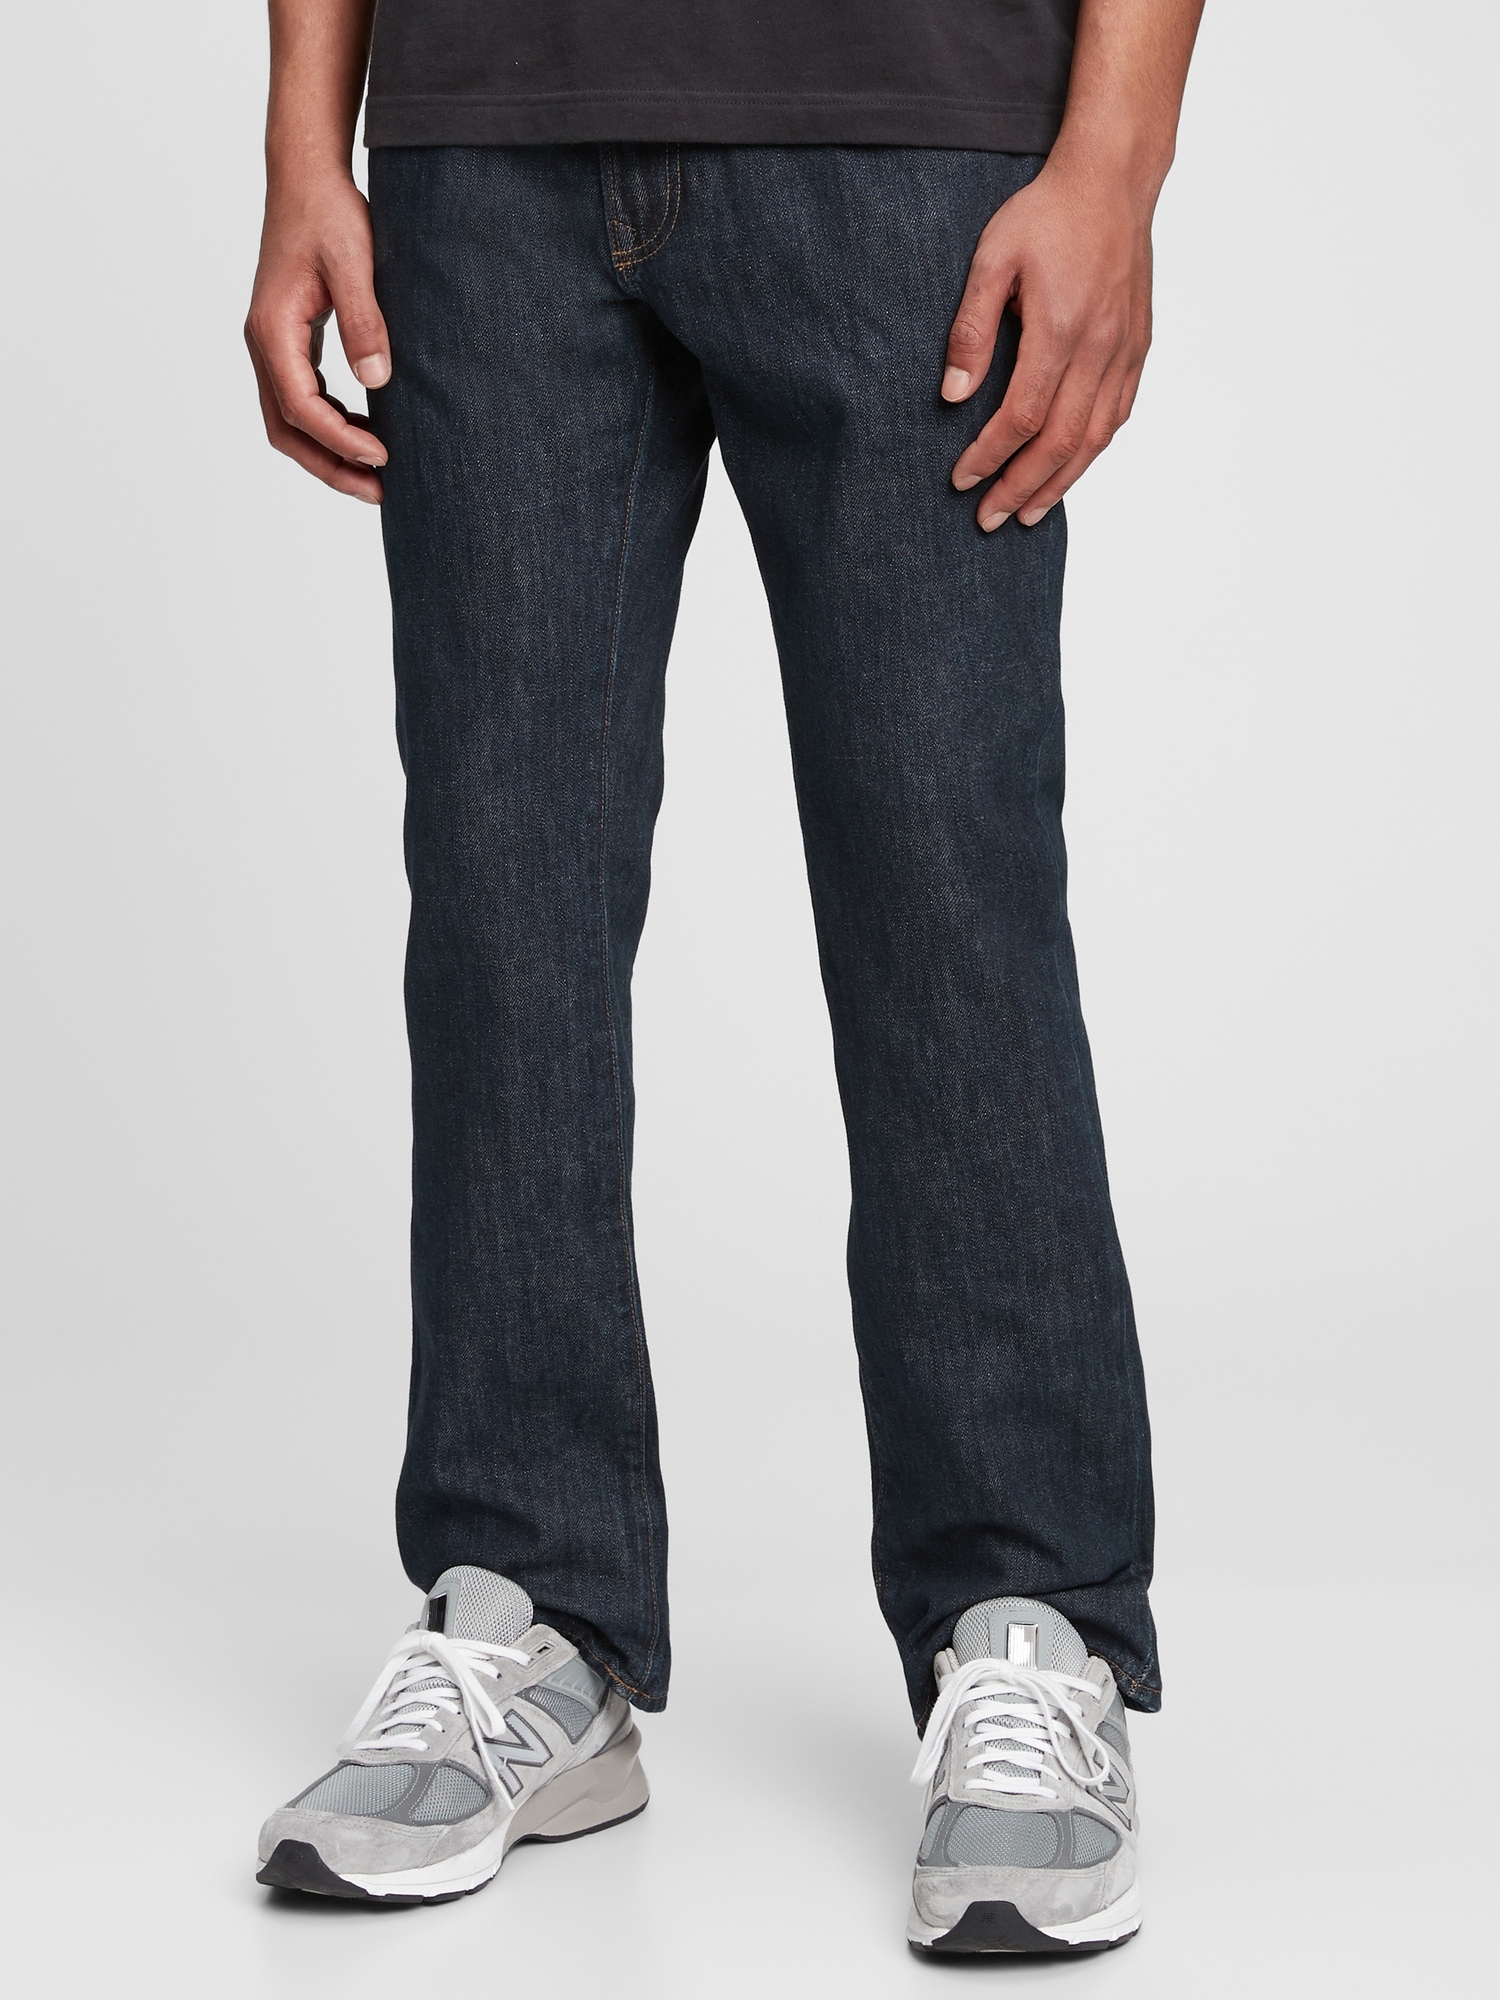 Boot Jeans with Washwell | Gap